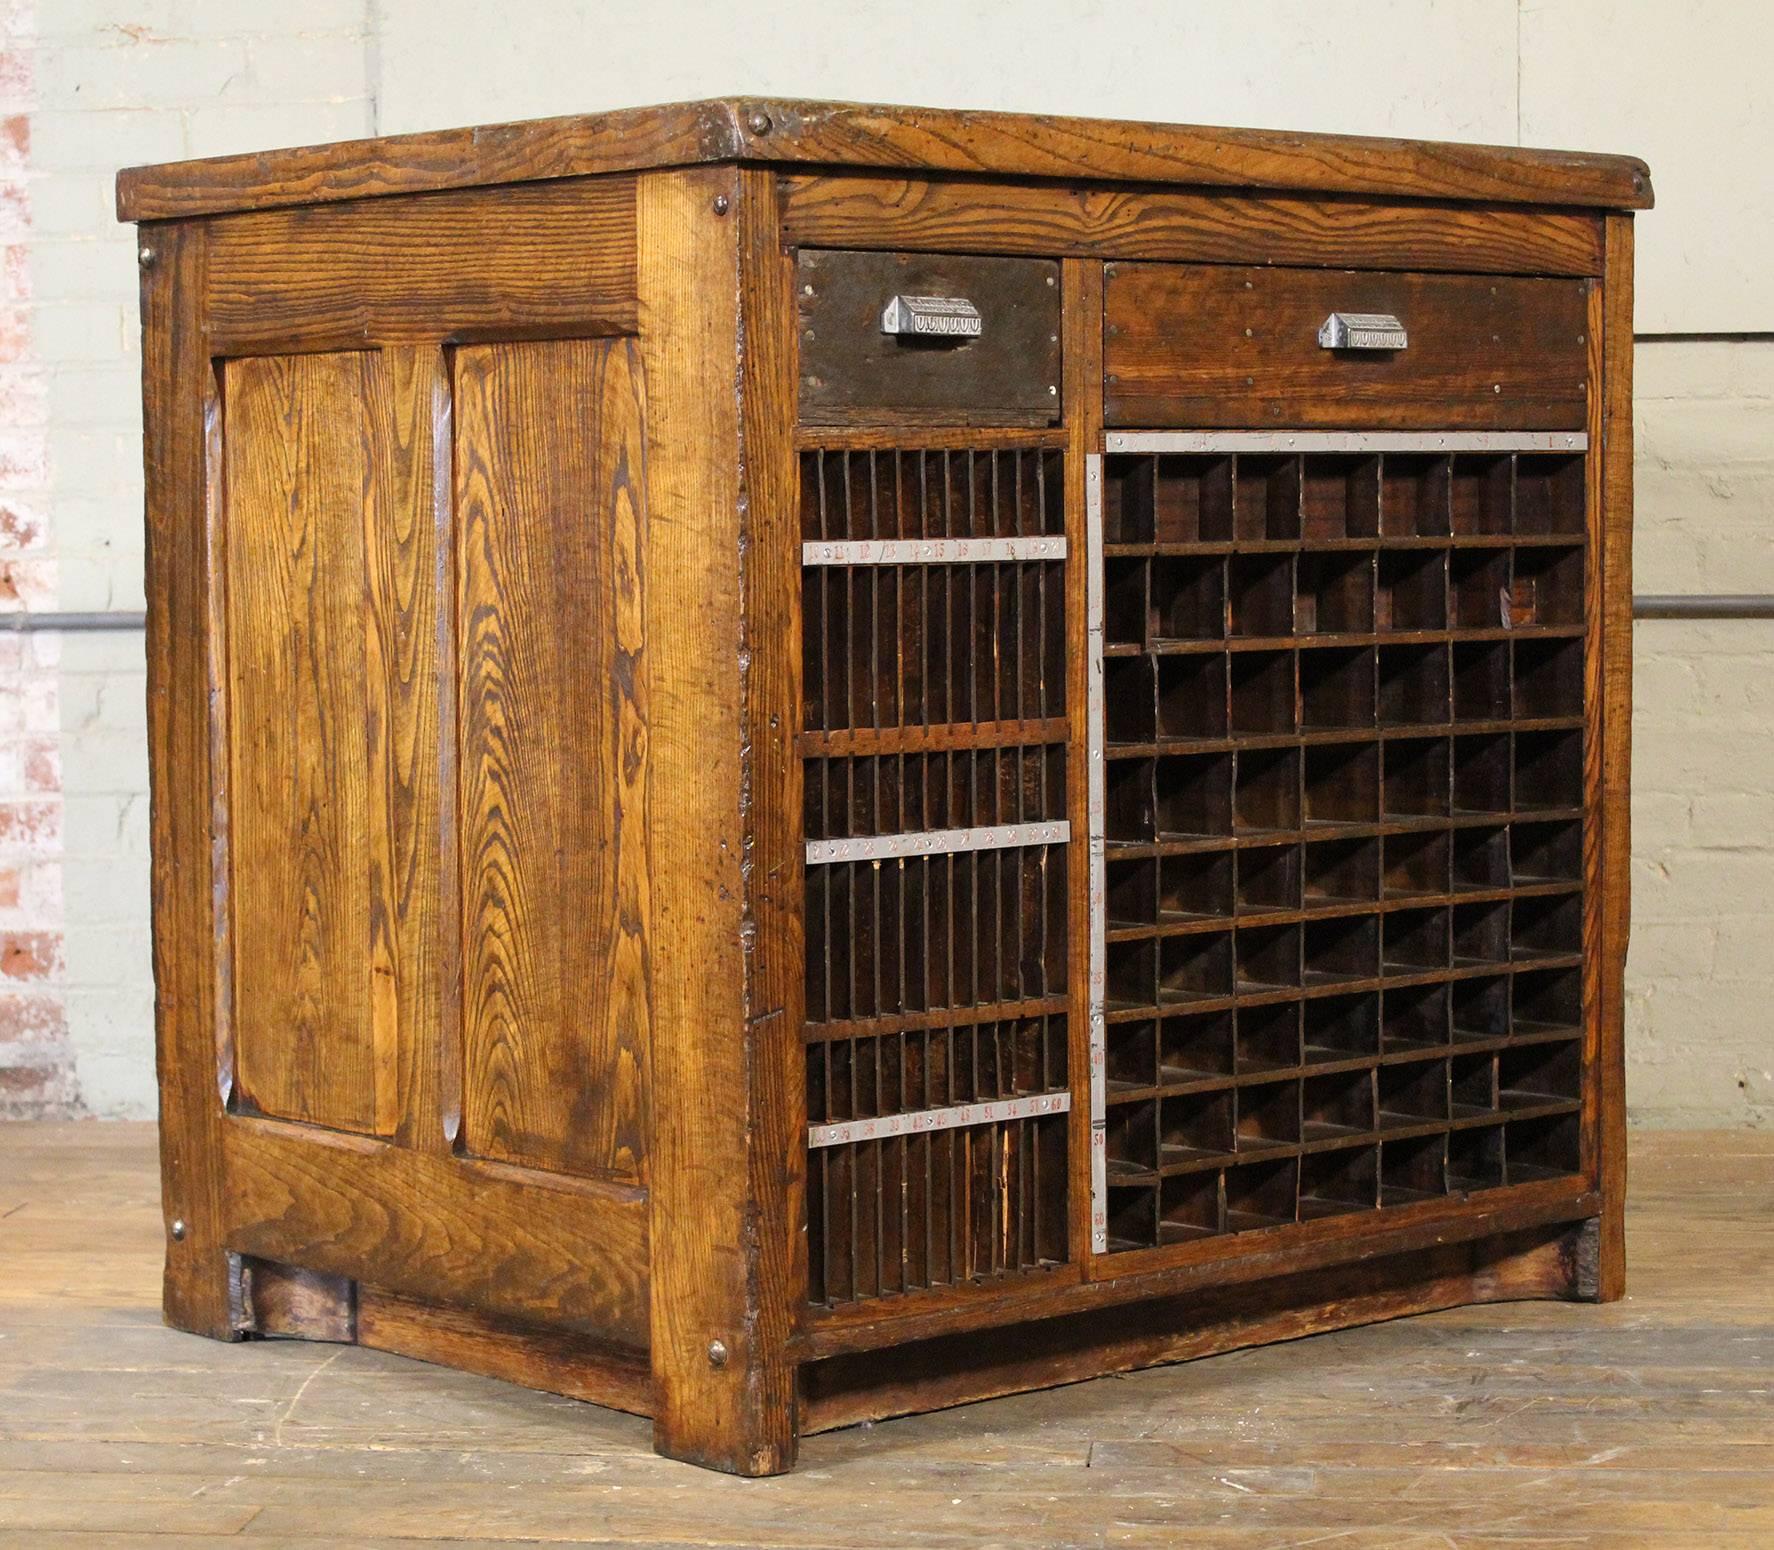 Vintage Industrial marble-top wooden counter storage parts cabinet made by the Tubbs Manufacturing Company, Ludington, MICH. Overall dimensions are 39 1/2" x 31 1/2" x 38 1/4" in height. Marble-top measures: 36" x 28". Steel